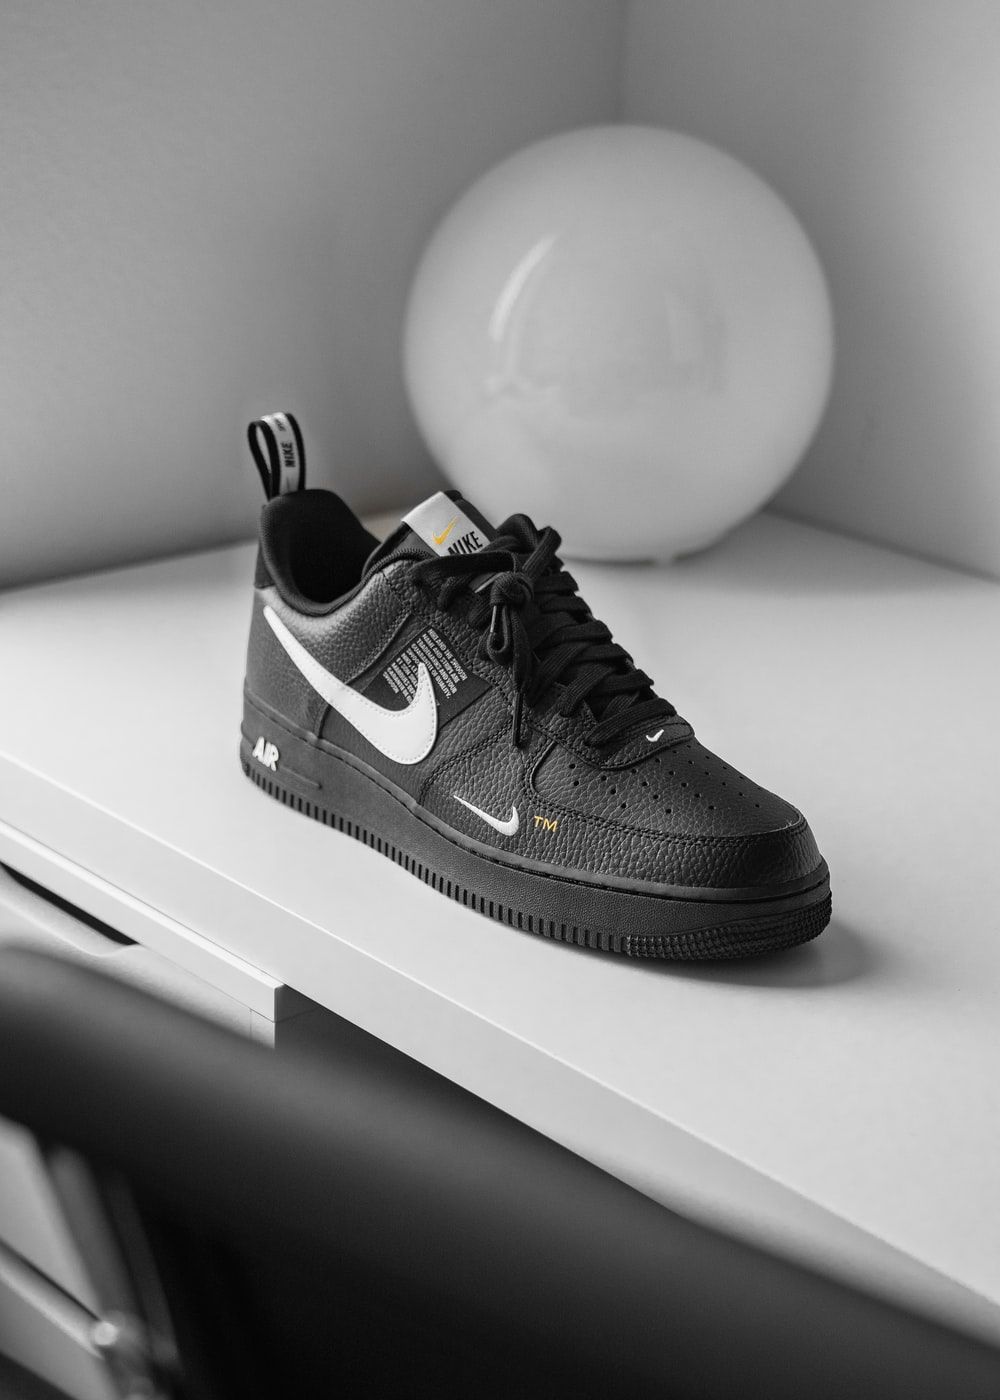 Unpaired OFF WHITE X Nike Air Force 1 Low Top Sneaker Photo